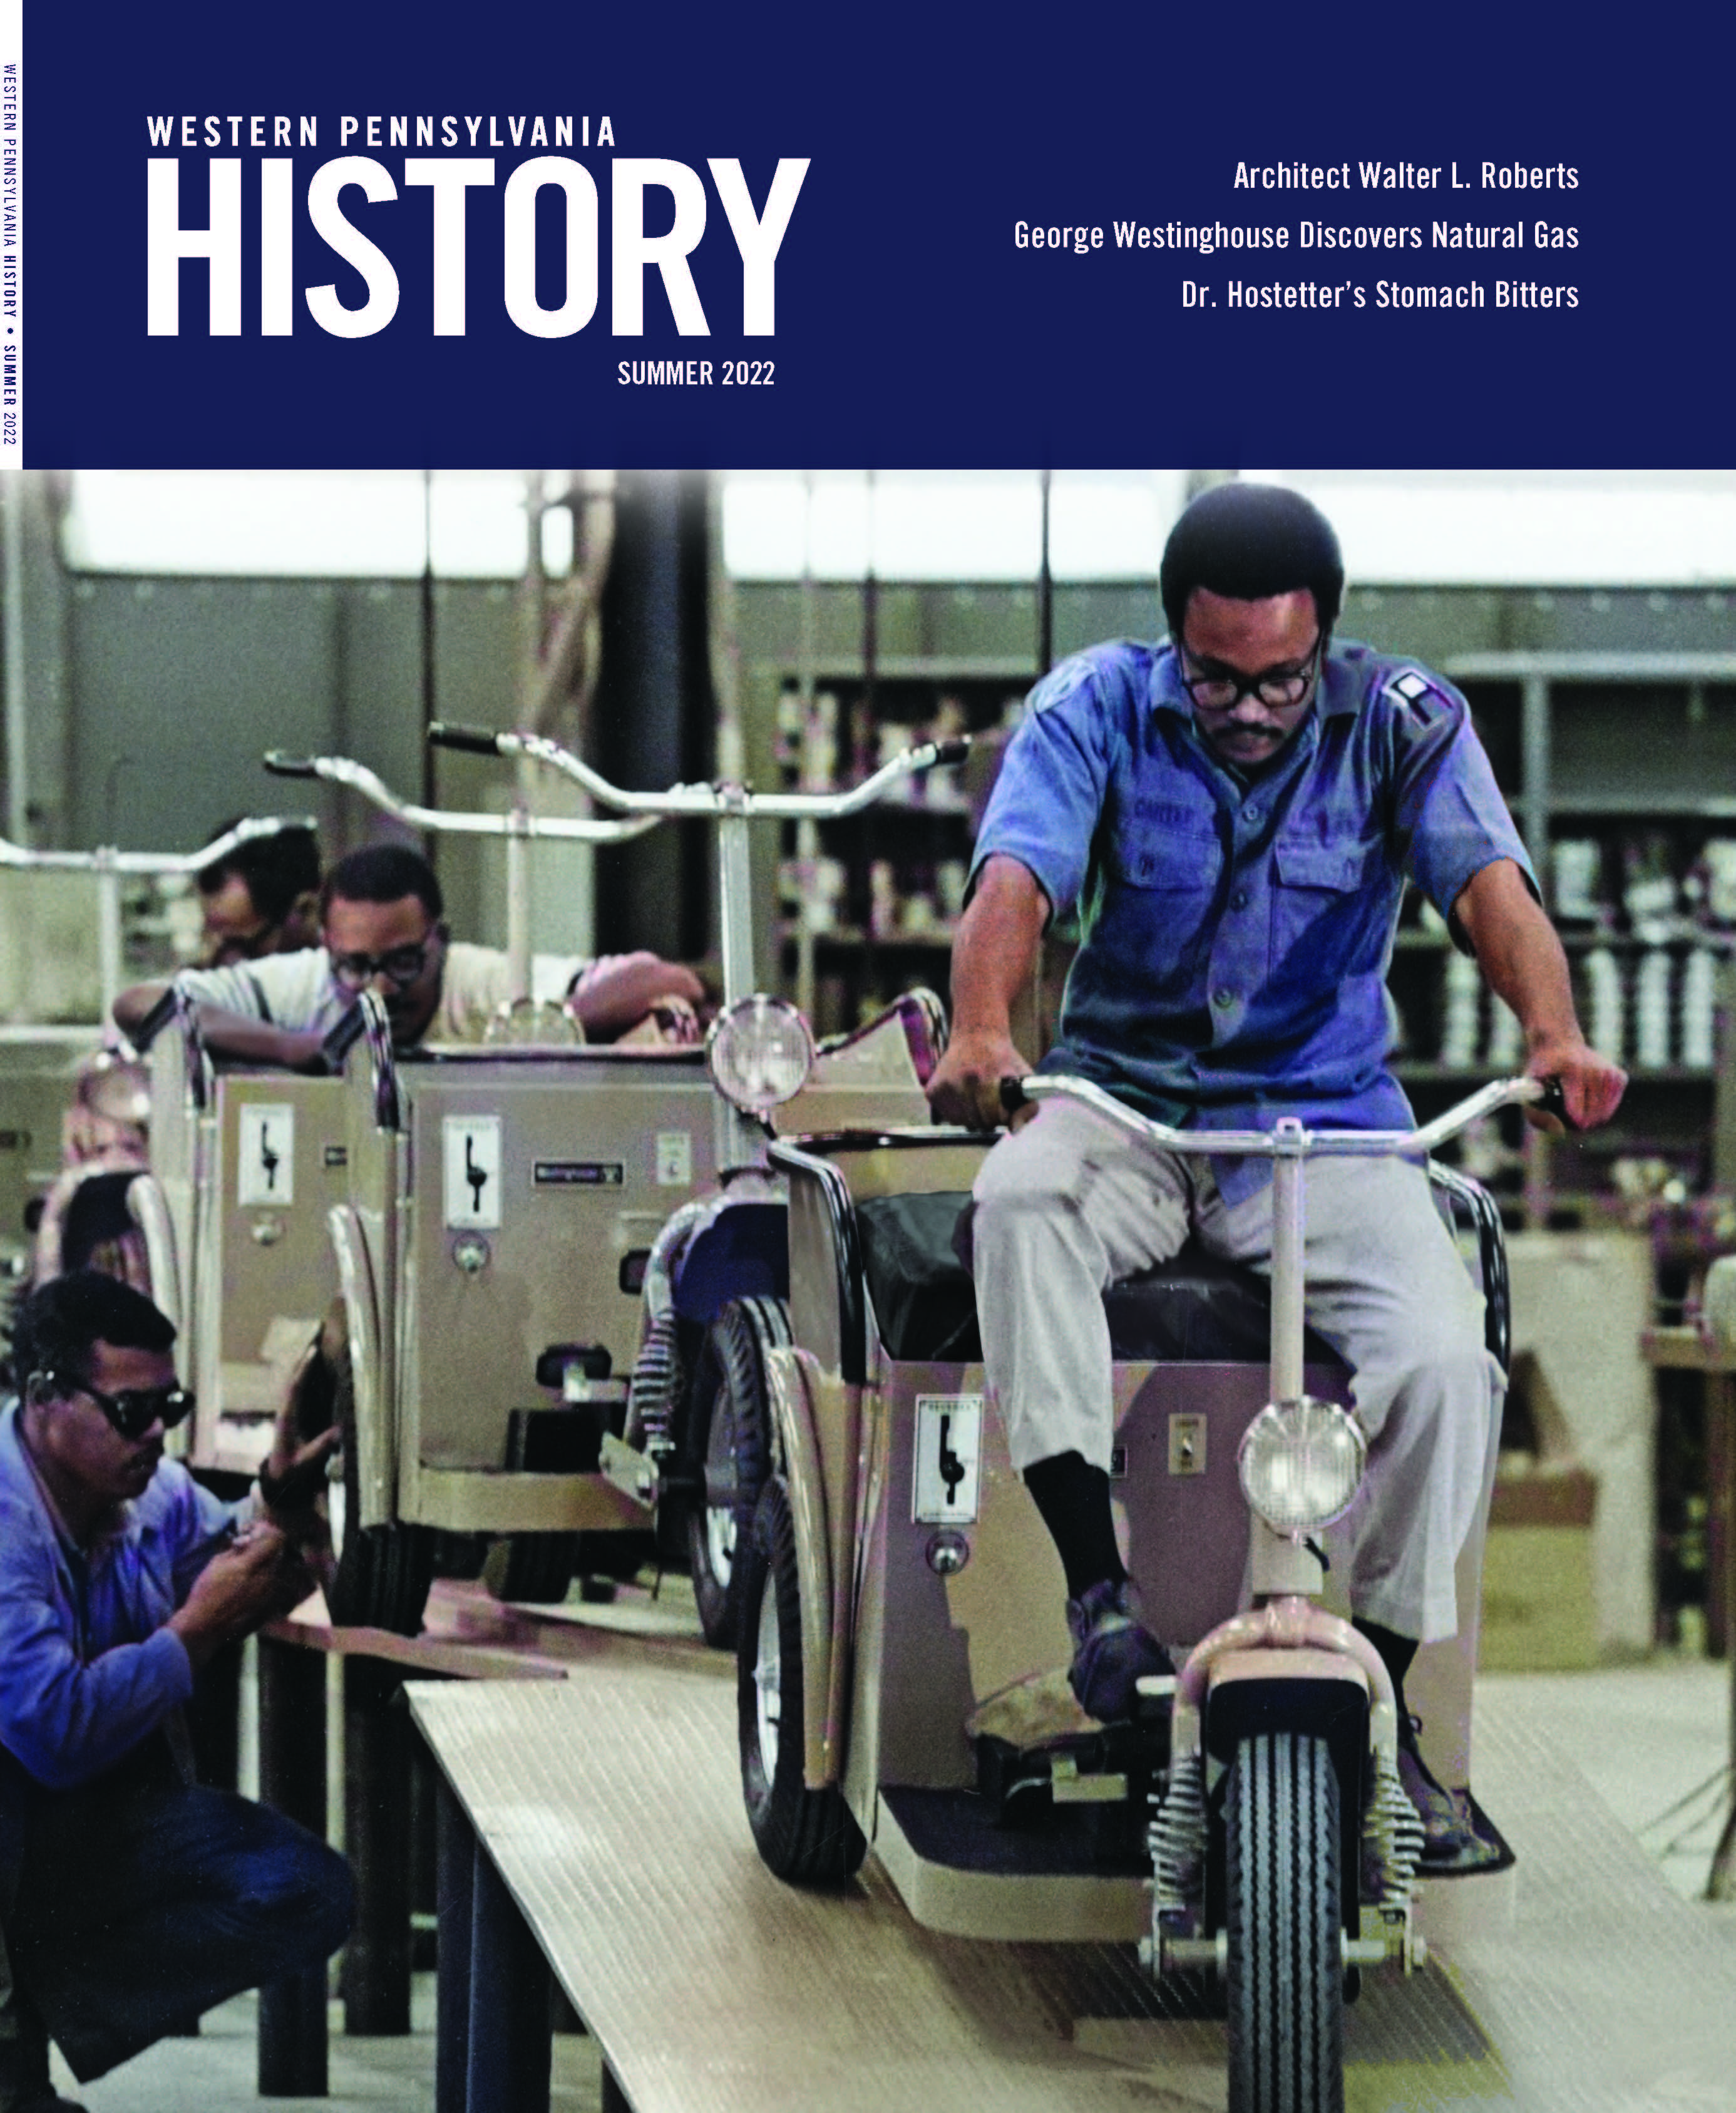 Magazine cover with photo of men inspecting and working on electric tricycles.